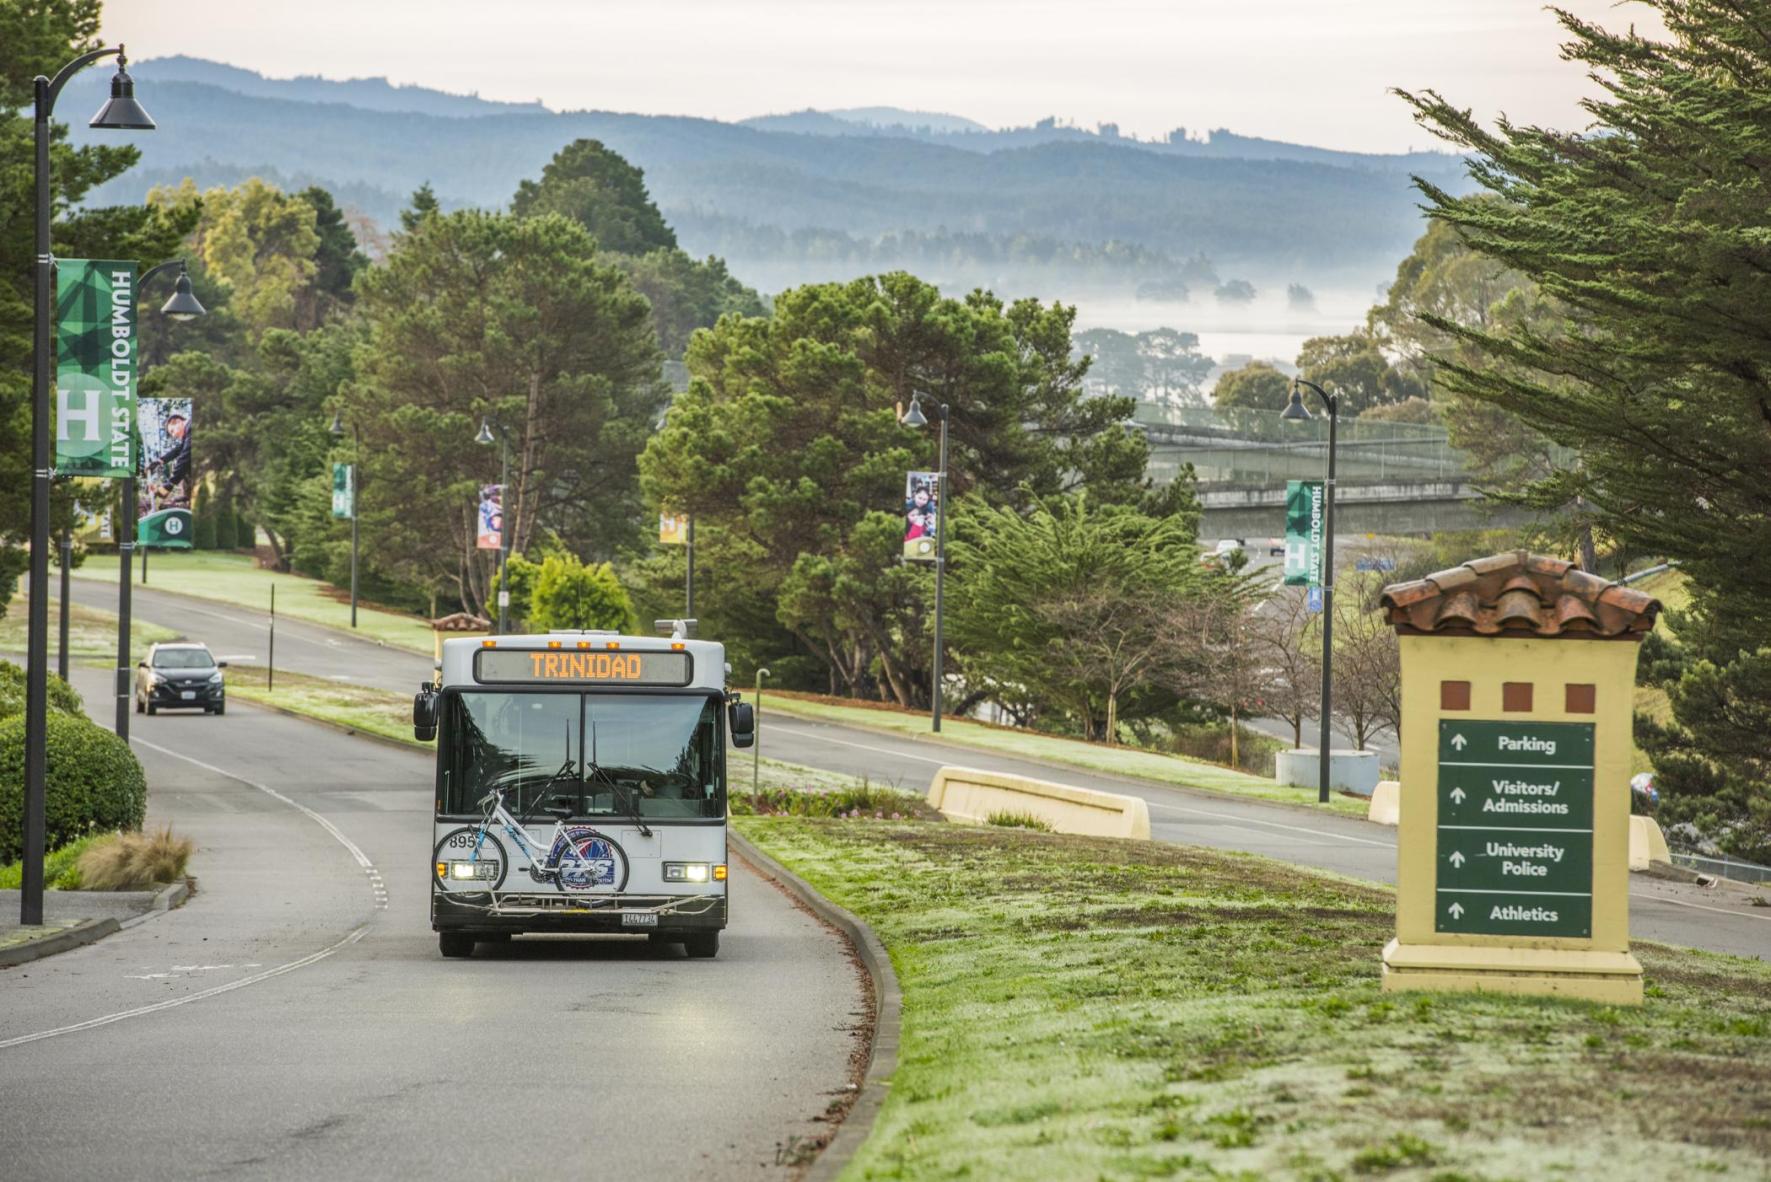 The Jack Pass is a transit pass that provides unlimited rides on local and regional buses. It's free to students and heavily discounted for faculty/staff